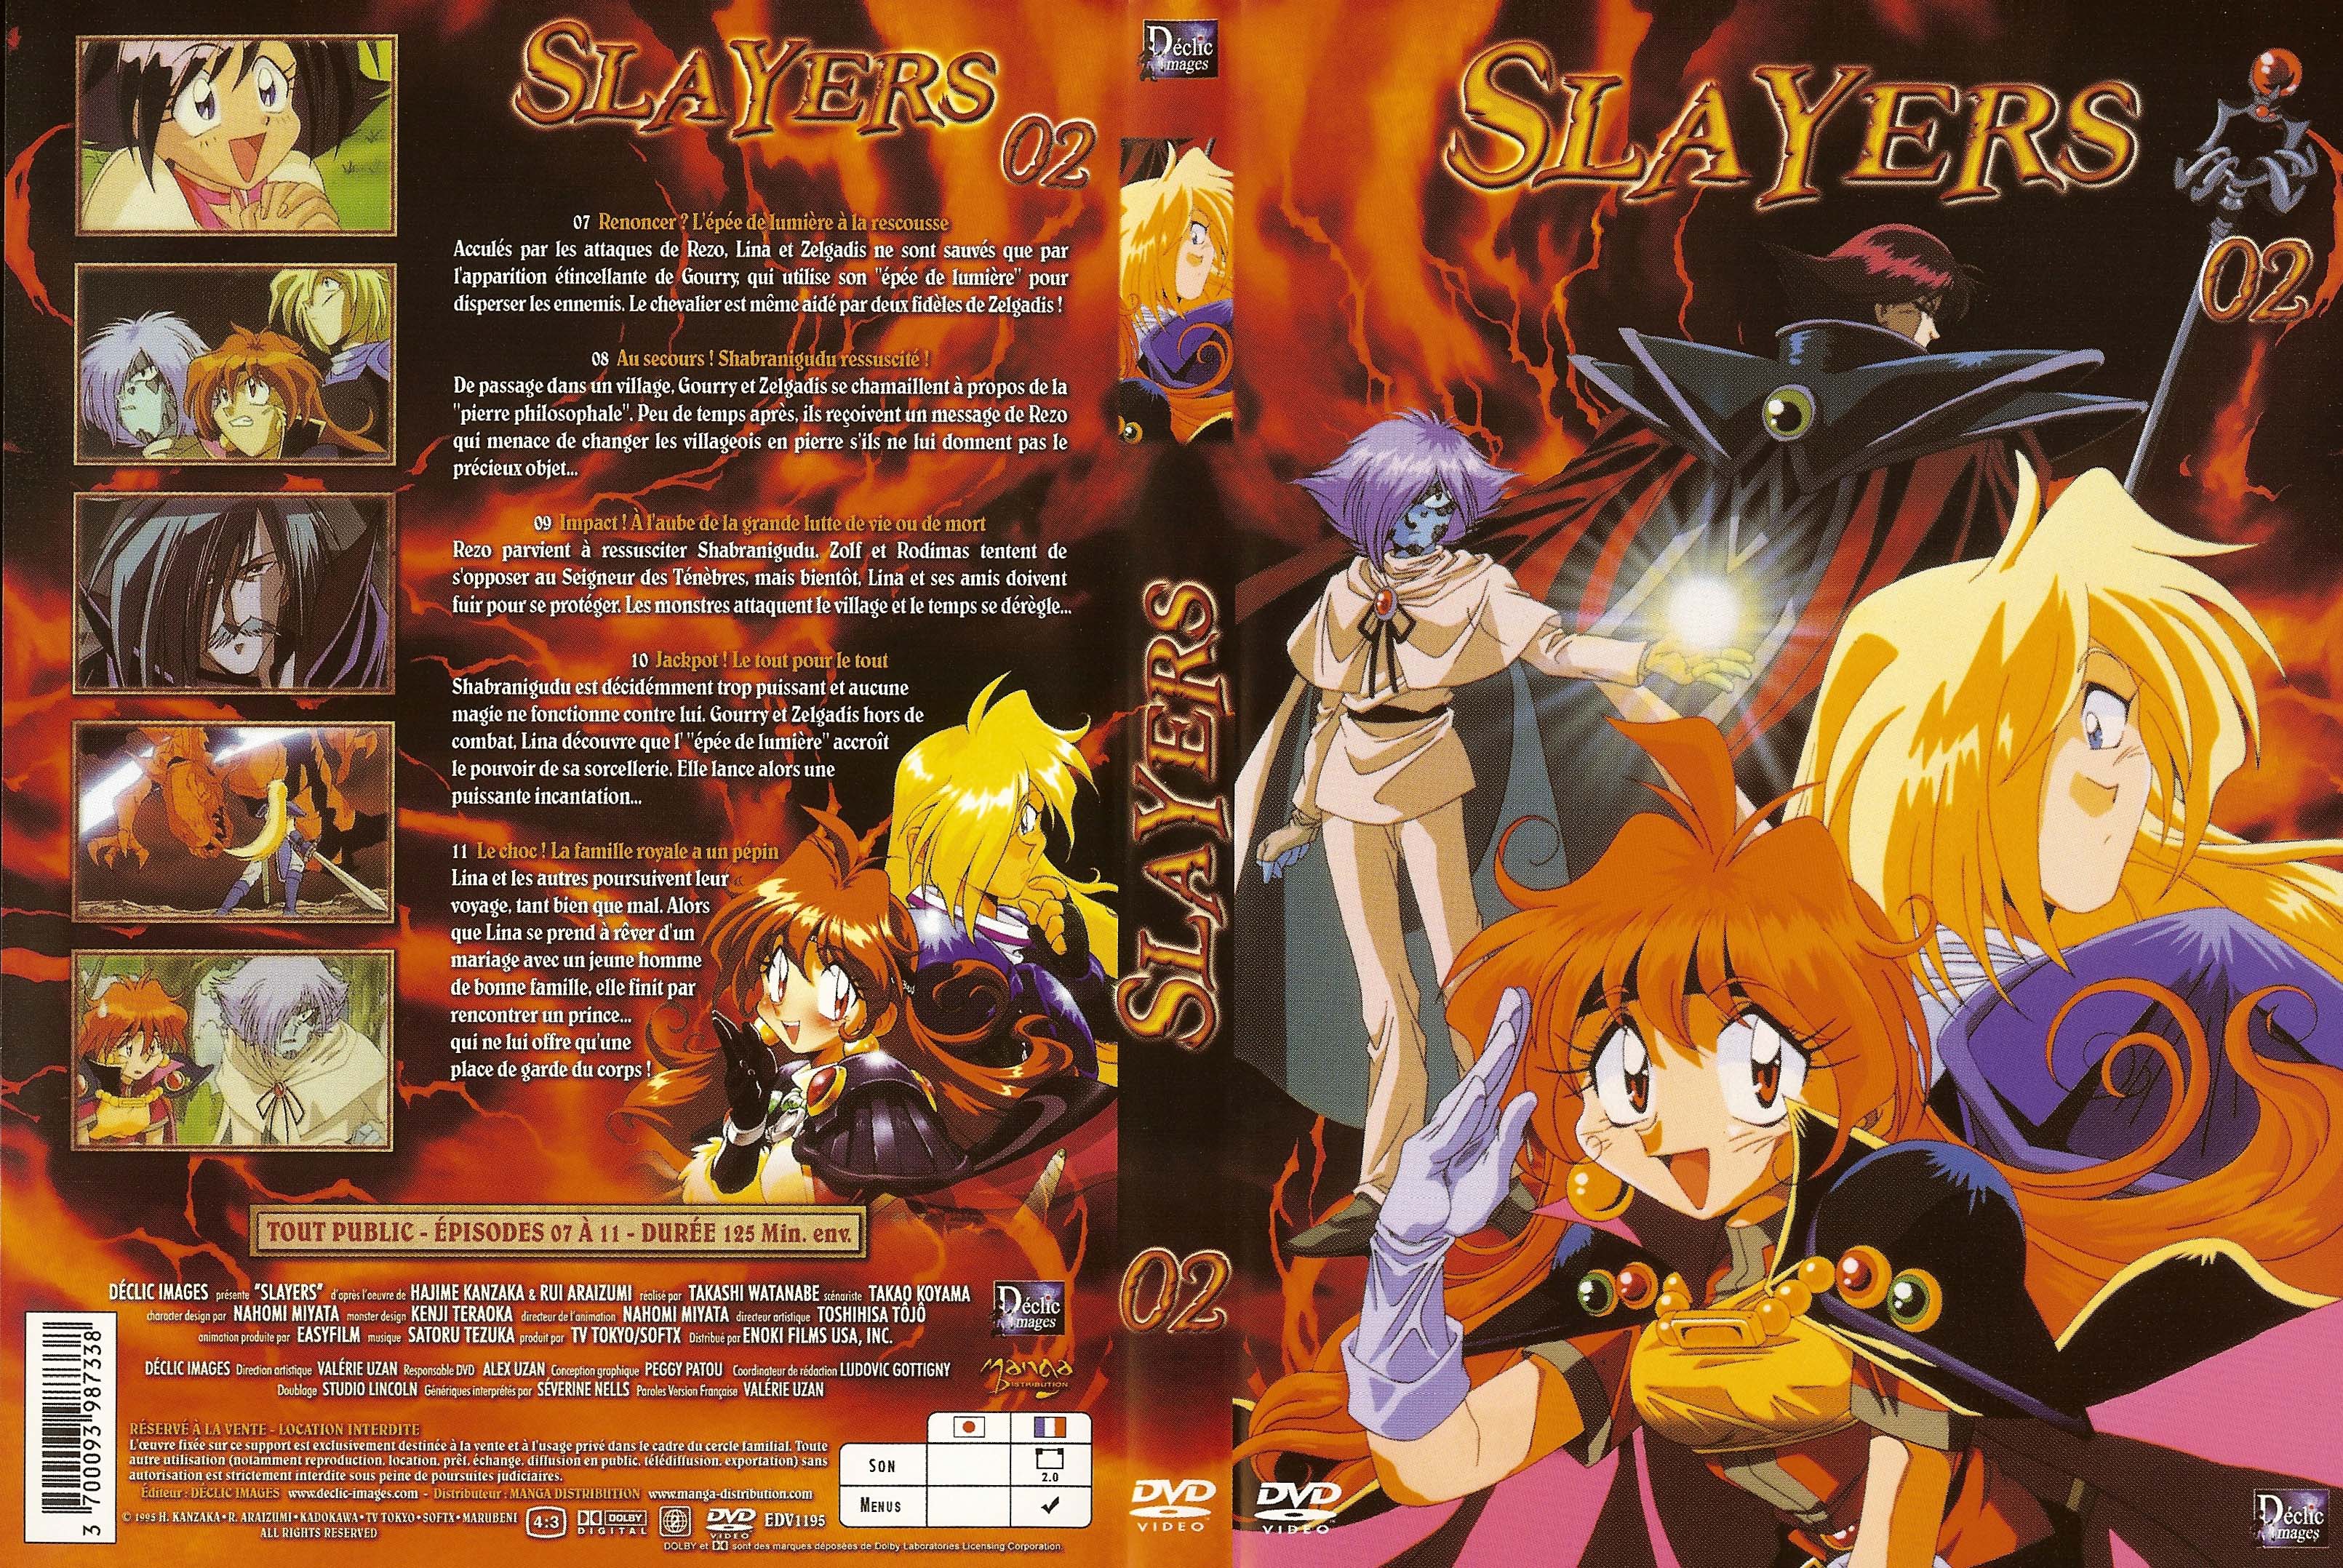 Jaquette DVD Slayers DVD 2